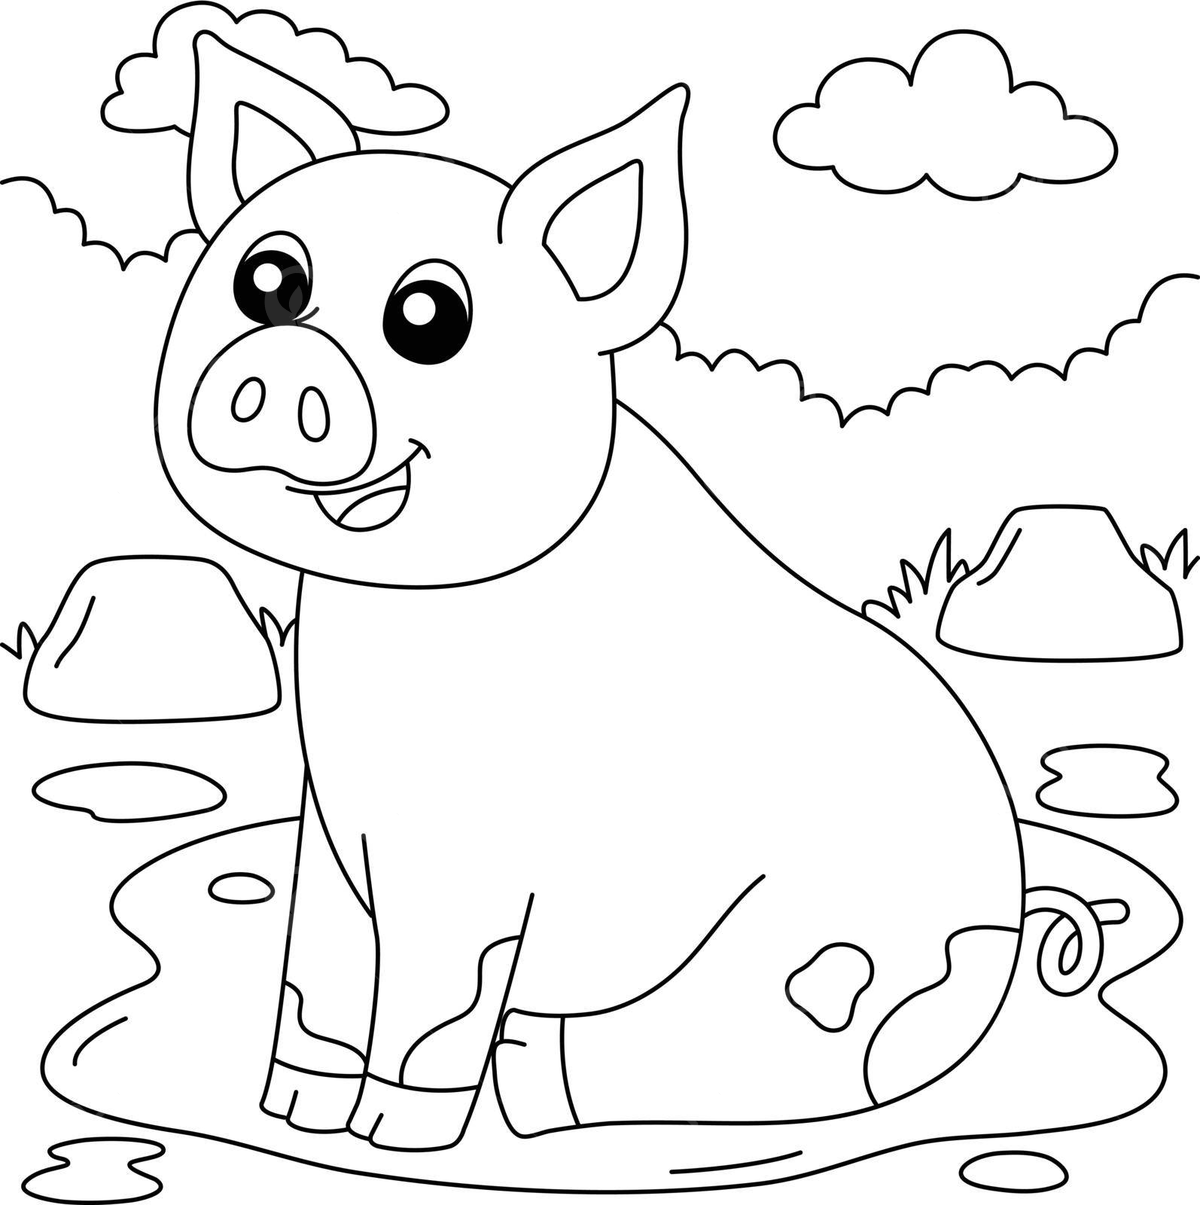 Pig coloring page for kids isolated piggy colouring book vector isolated piggy colouring book png and vector with transparent background for free download